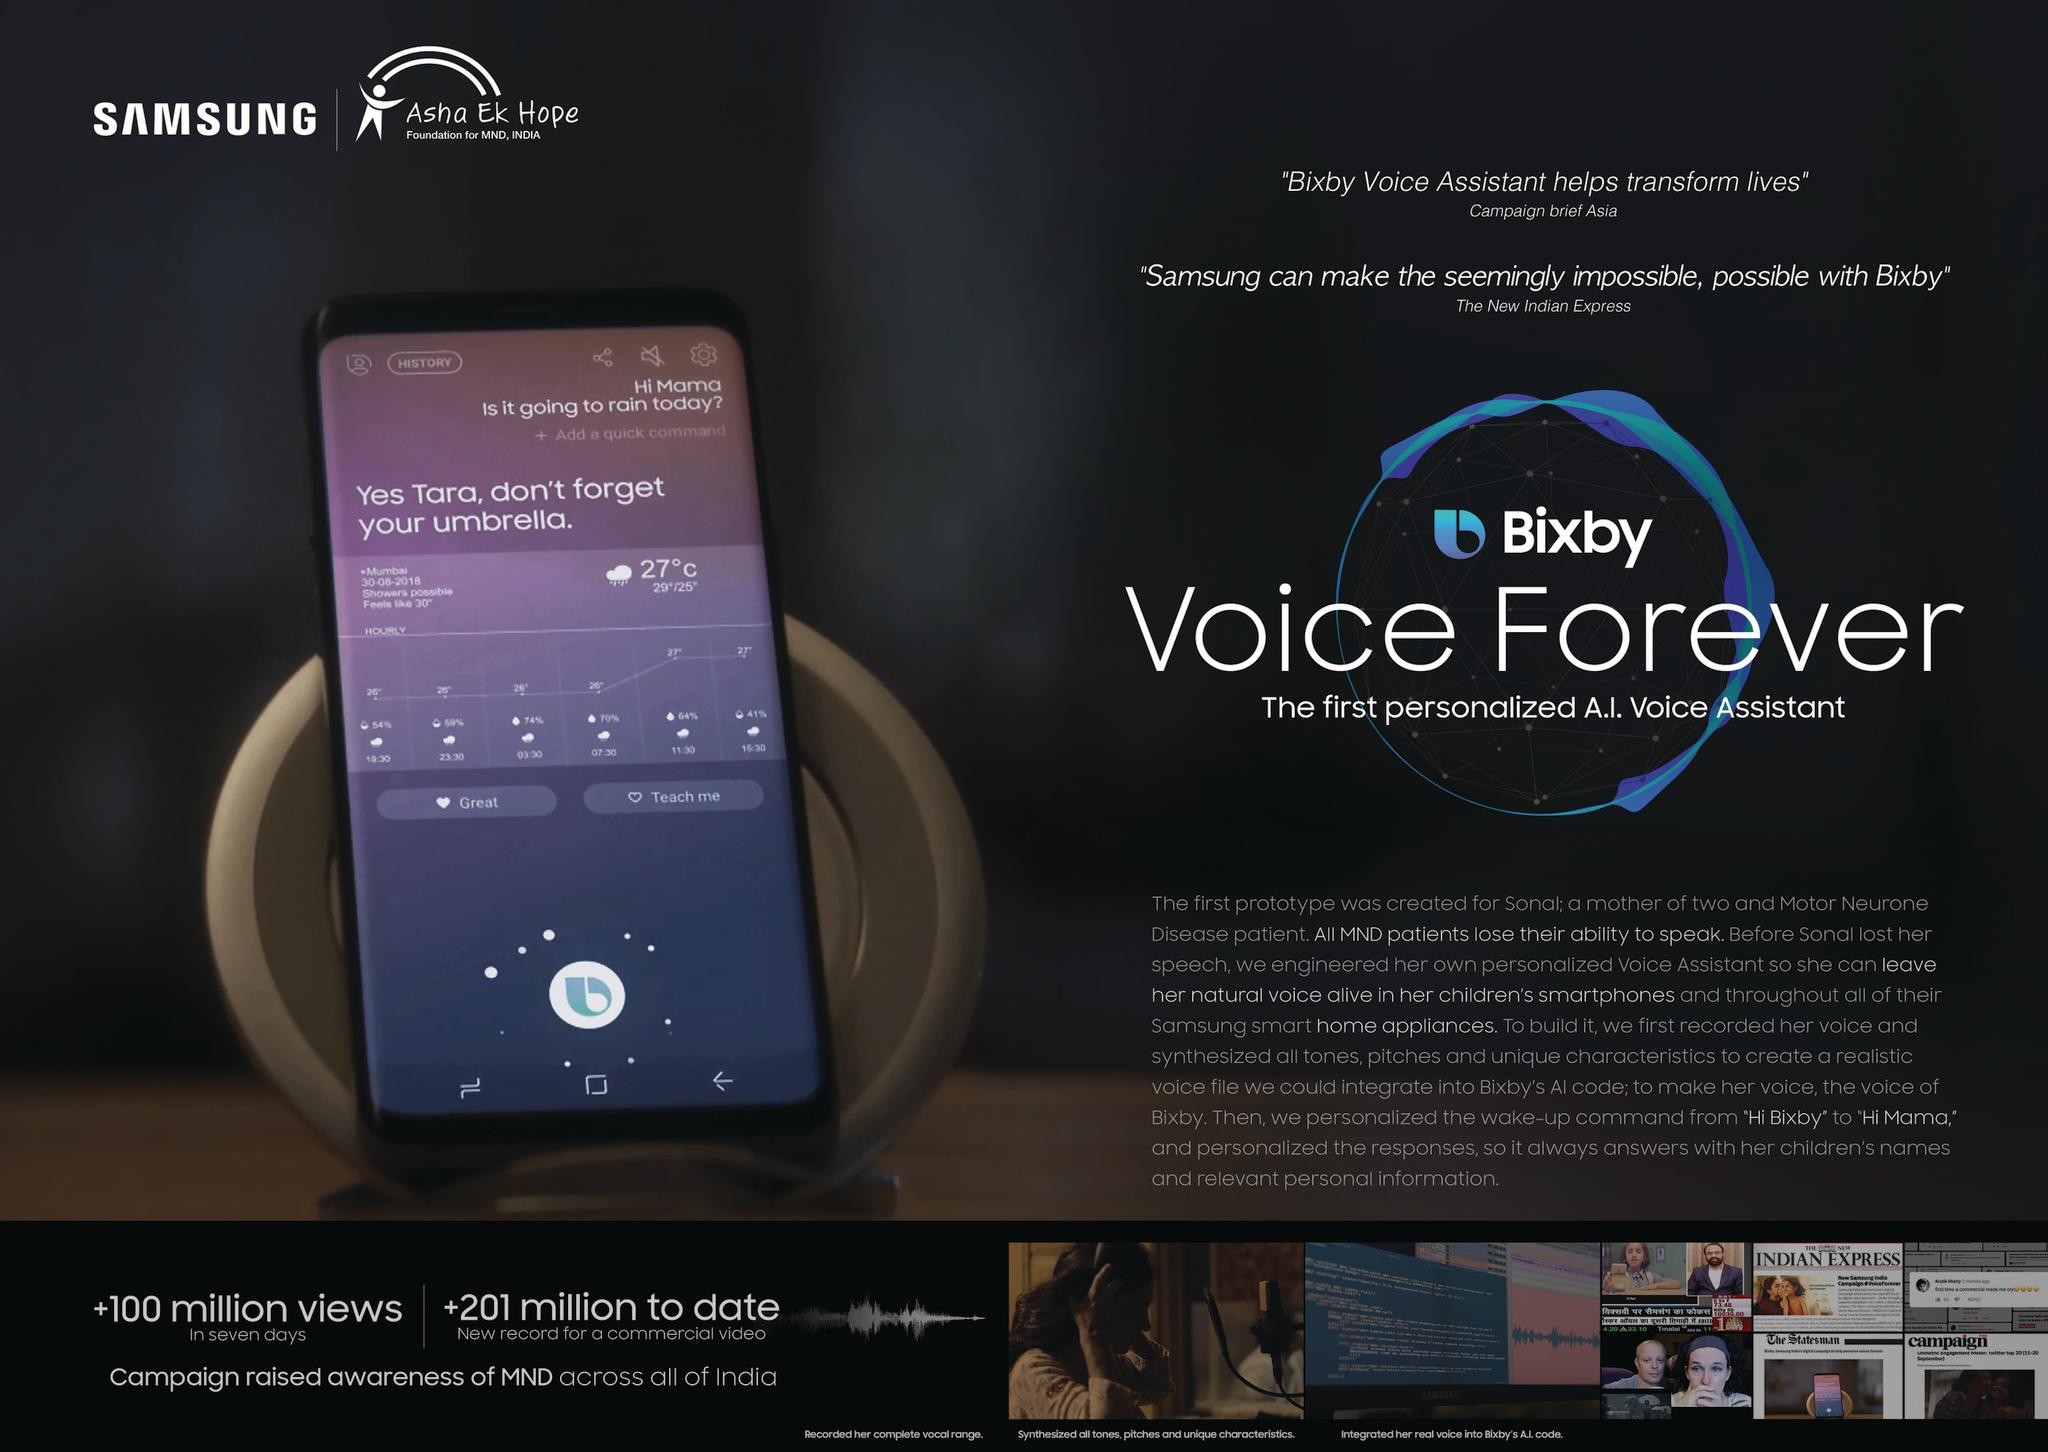 BIXBY VOICE FOREVER